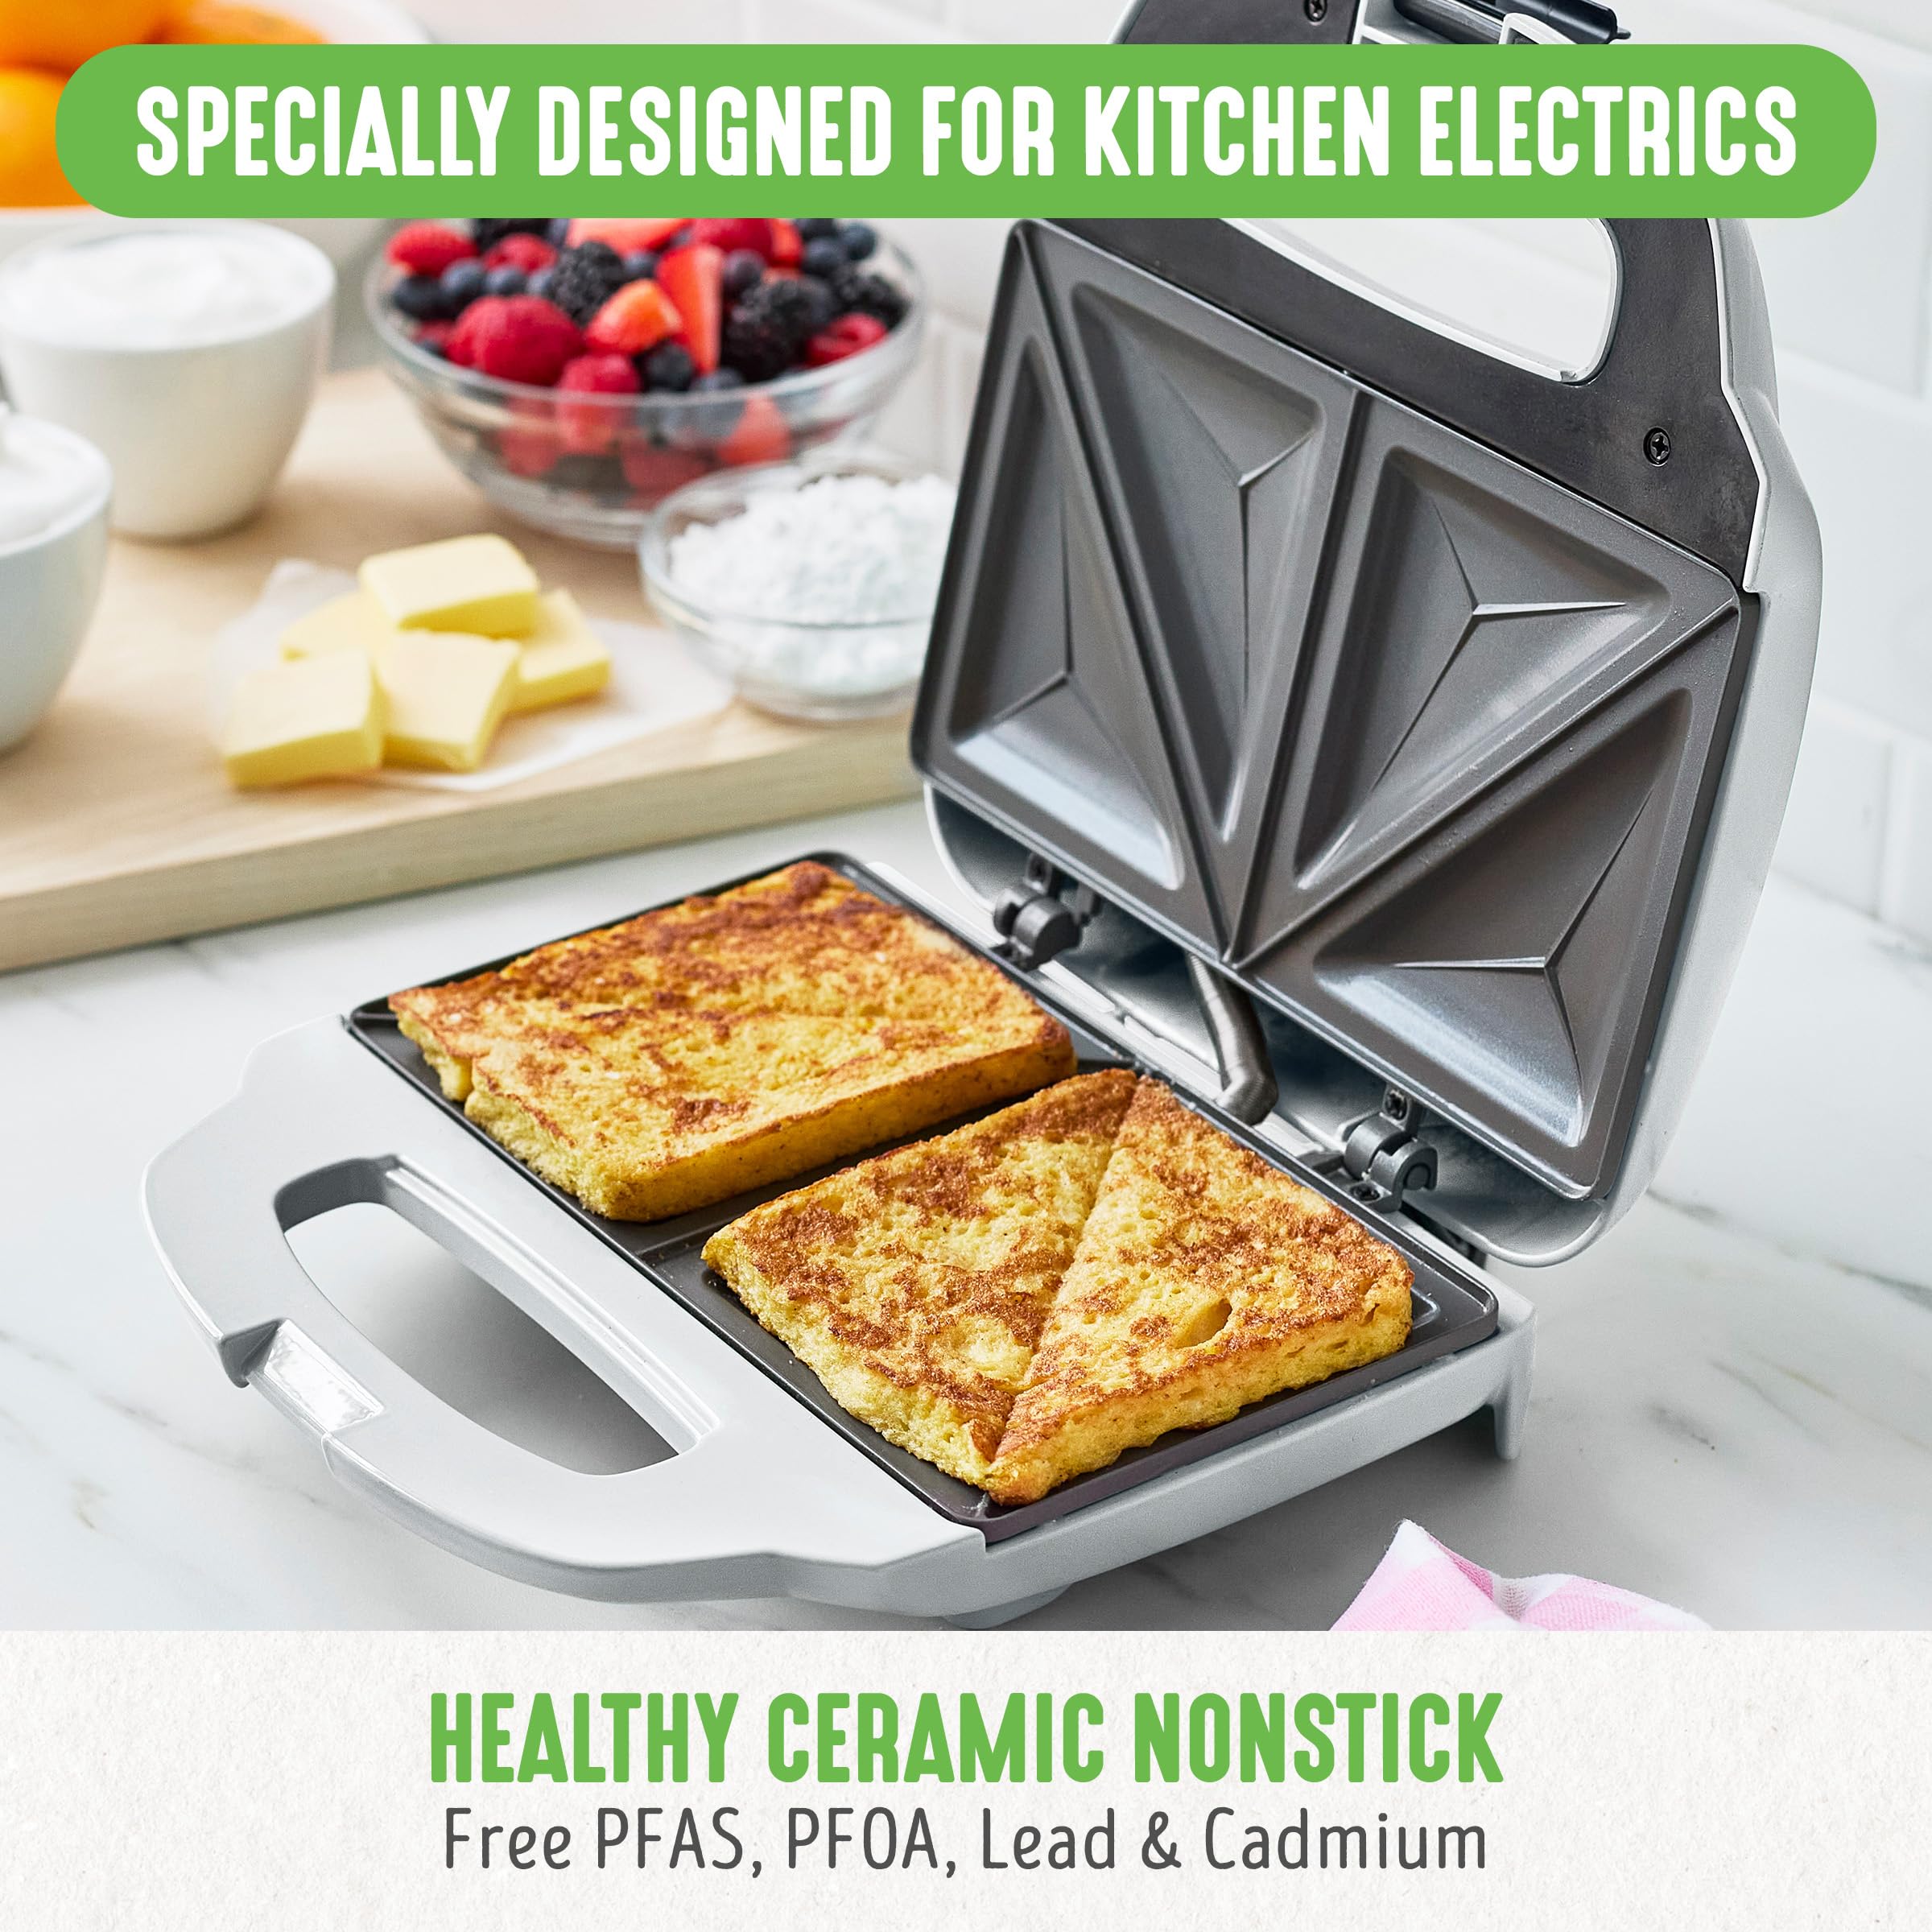 GreenLife Pro Electric Panini Press Grill and Sandwich Maker, French Toast Breakfast Sandwich and Waffle's, Healthy Ceramic Nonstick Plates,Easy Indicator Light, PFAS-Free, Silver